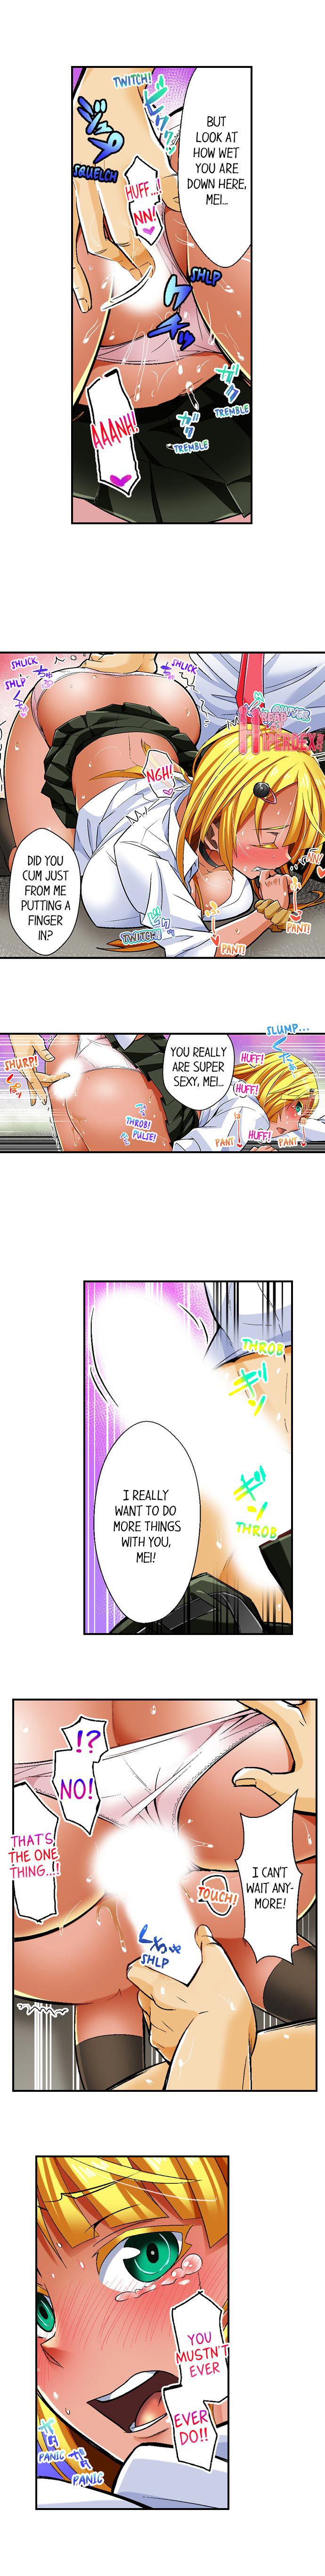 Sex With a Tanned Girl in a Bathhouse - Chapter 5 Page 7